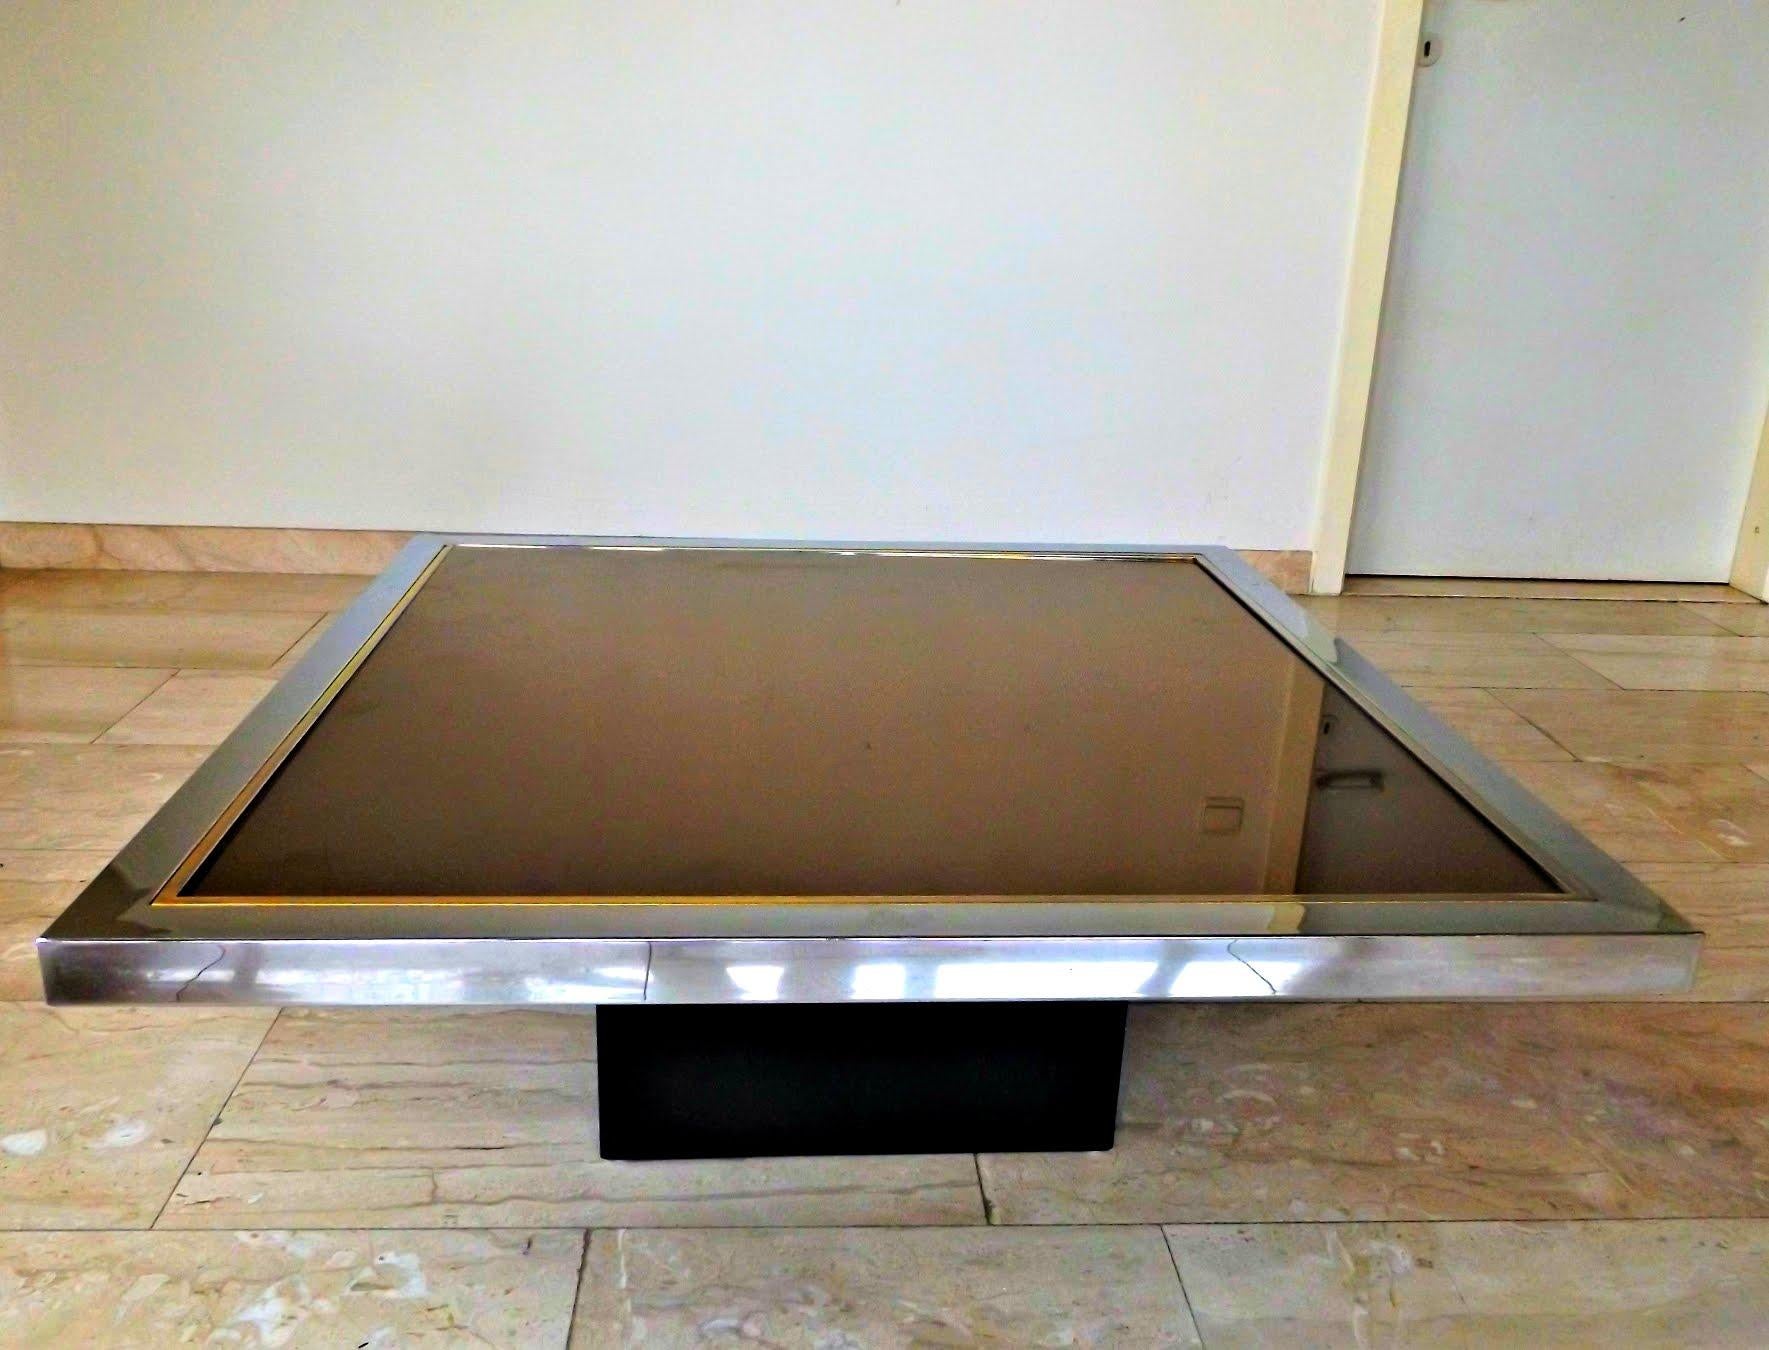 Hollywood Regency coffee table made from chrome with smoked glass on a lacquered wooden base.

The table is in good condition with the original glass.

1970s, Belgium

Dimensions:
Height: 45 cm/17.71